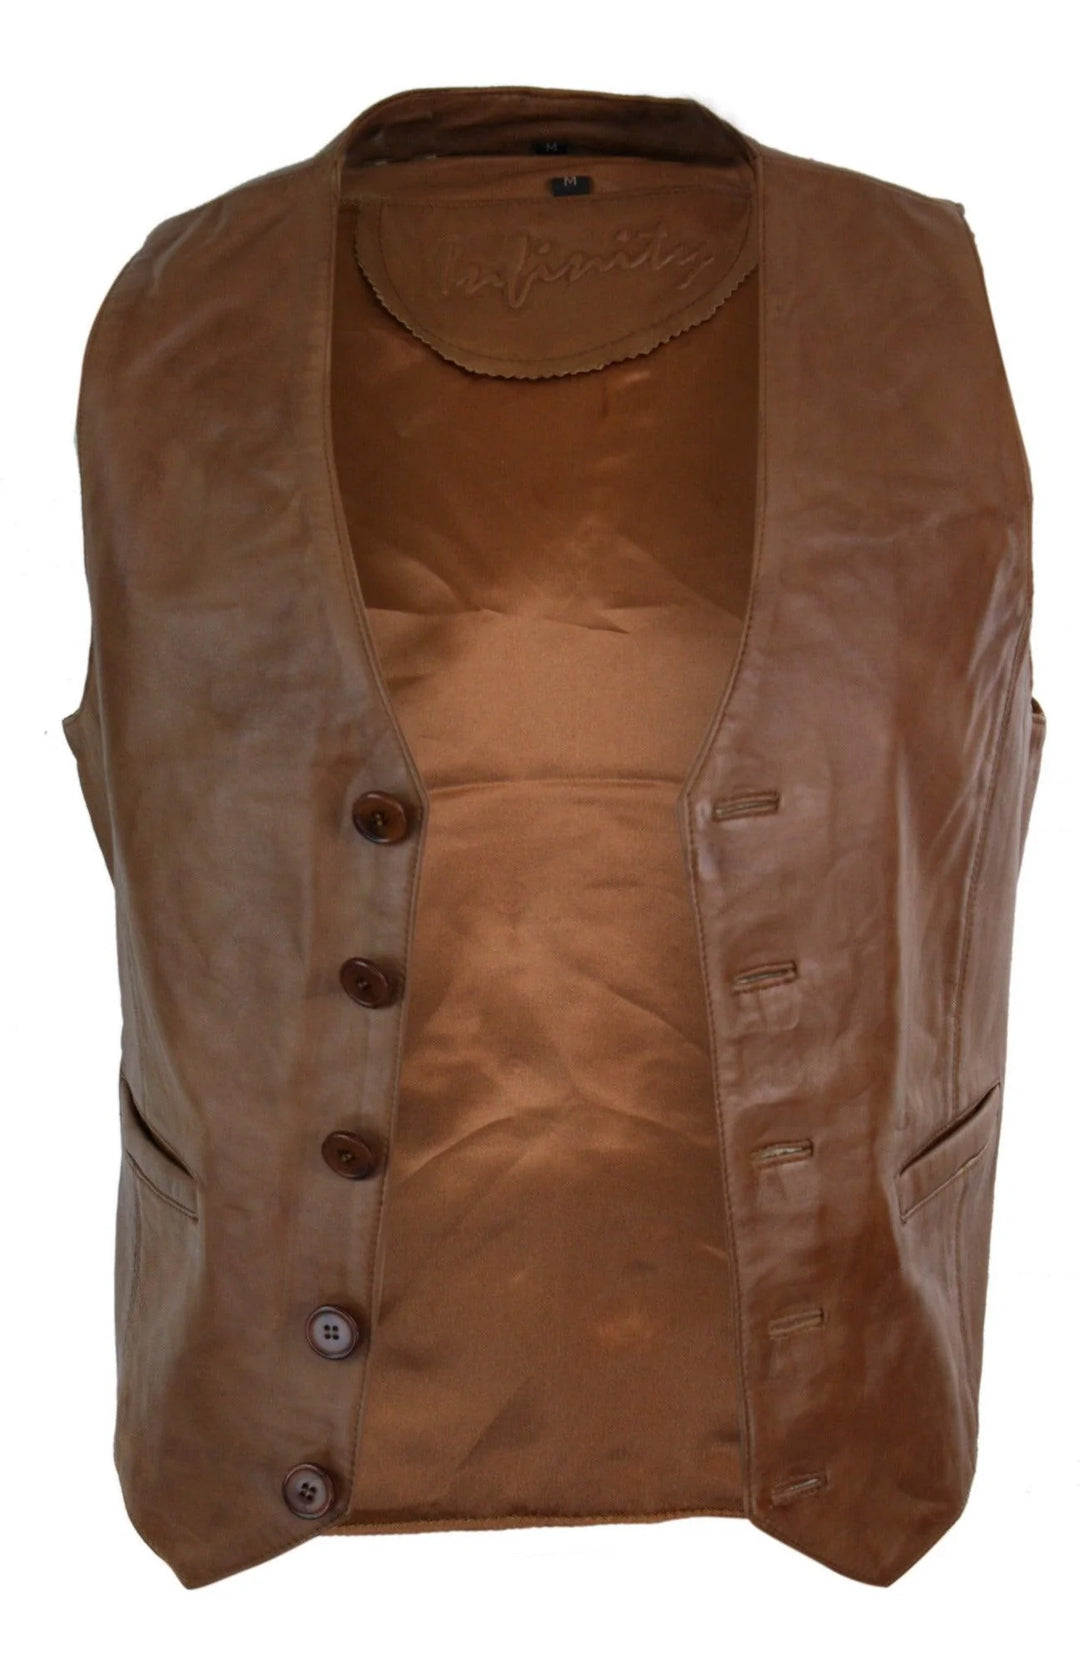 Real Leather Gilet Quilted Men's Waistcoat| All For Me Today